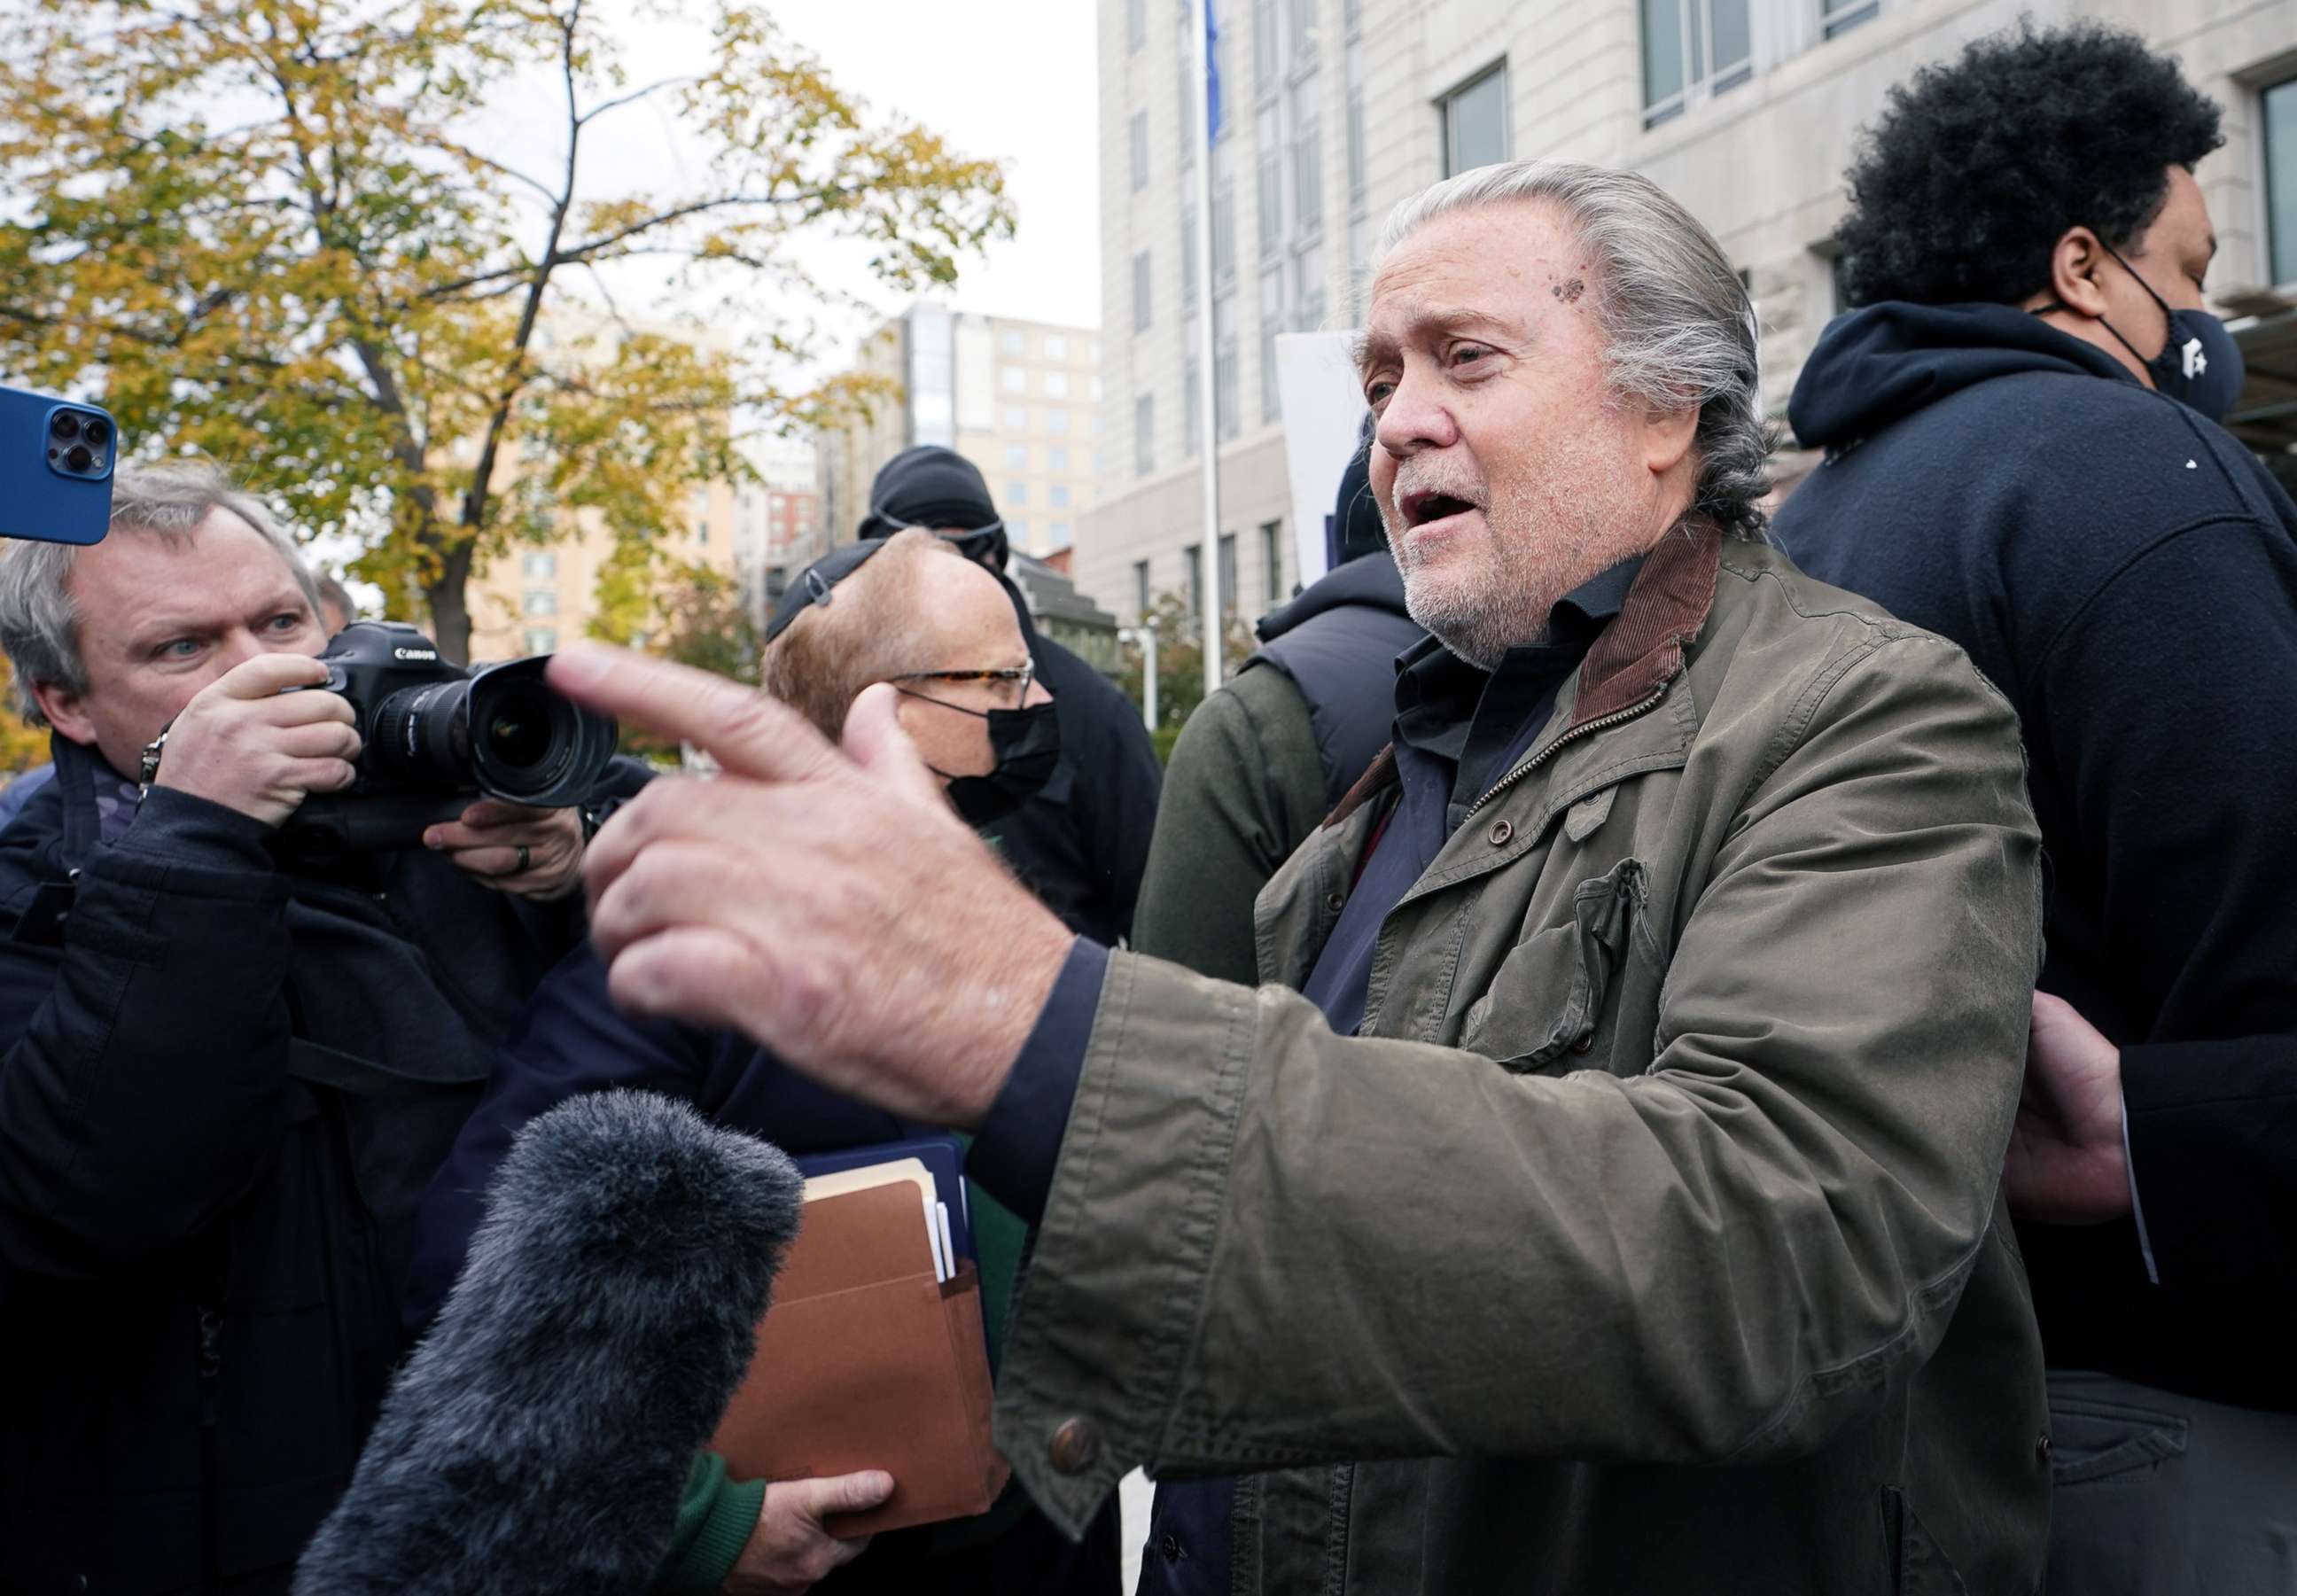 PHOTO: Steve Bannon, talk show host and former White House advisor to former President Donald Trump, speaks to media as he arrives at the FBI's Washington field office to turn himself in to federal authorities in Washington, Nov. 15, 2021.